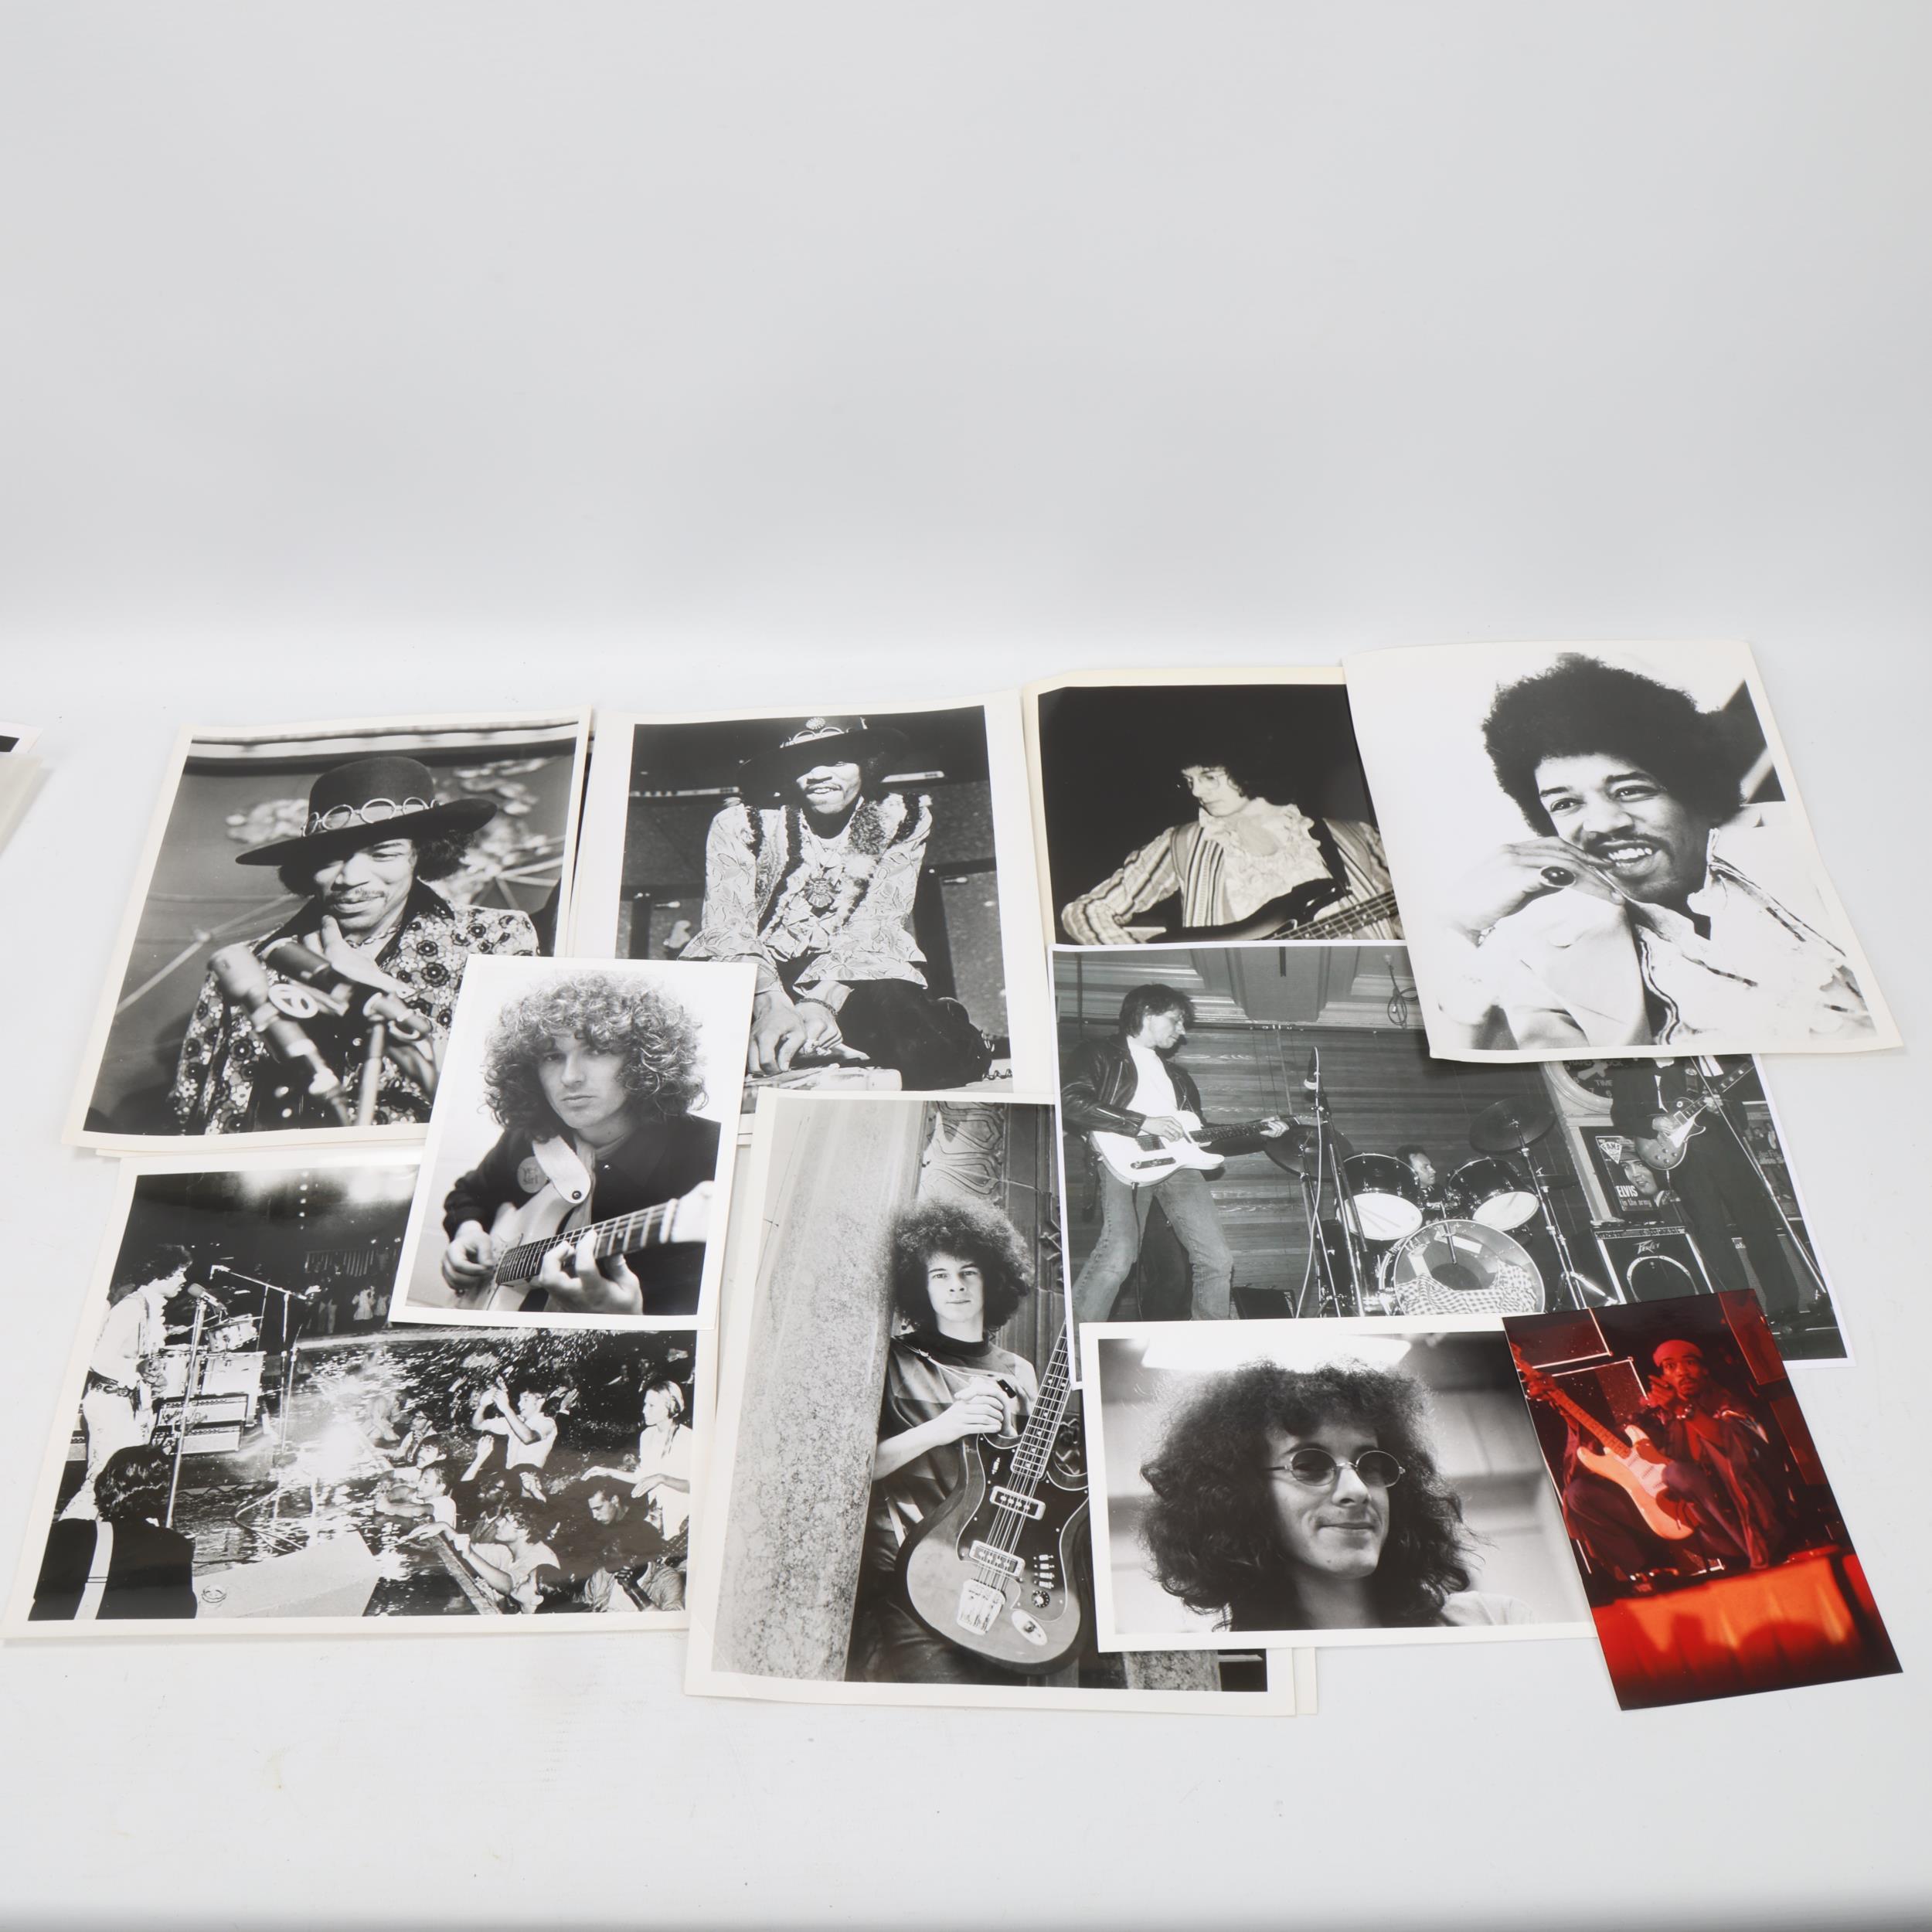 JIMI HENDRIX / MITCH MITCHELL. A Quantity of PHOTOGRAPHS & PRINTS. Two CDRs of images included in - Image 2 of 3